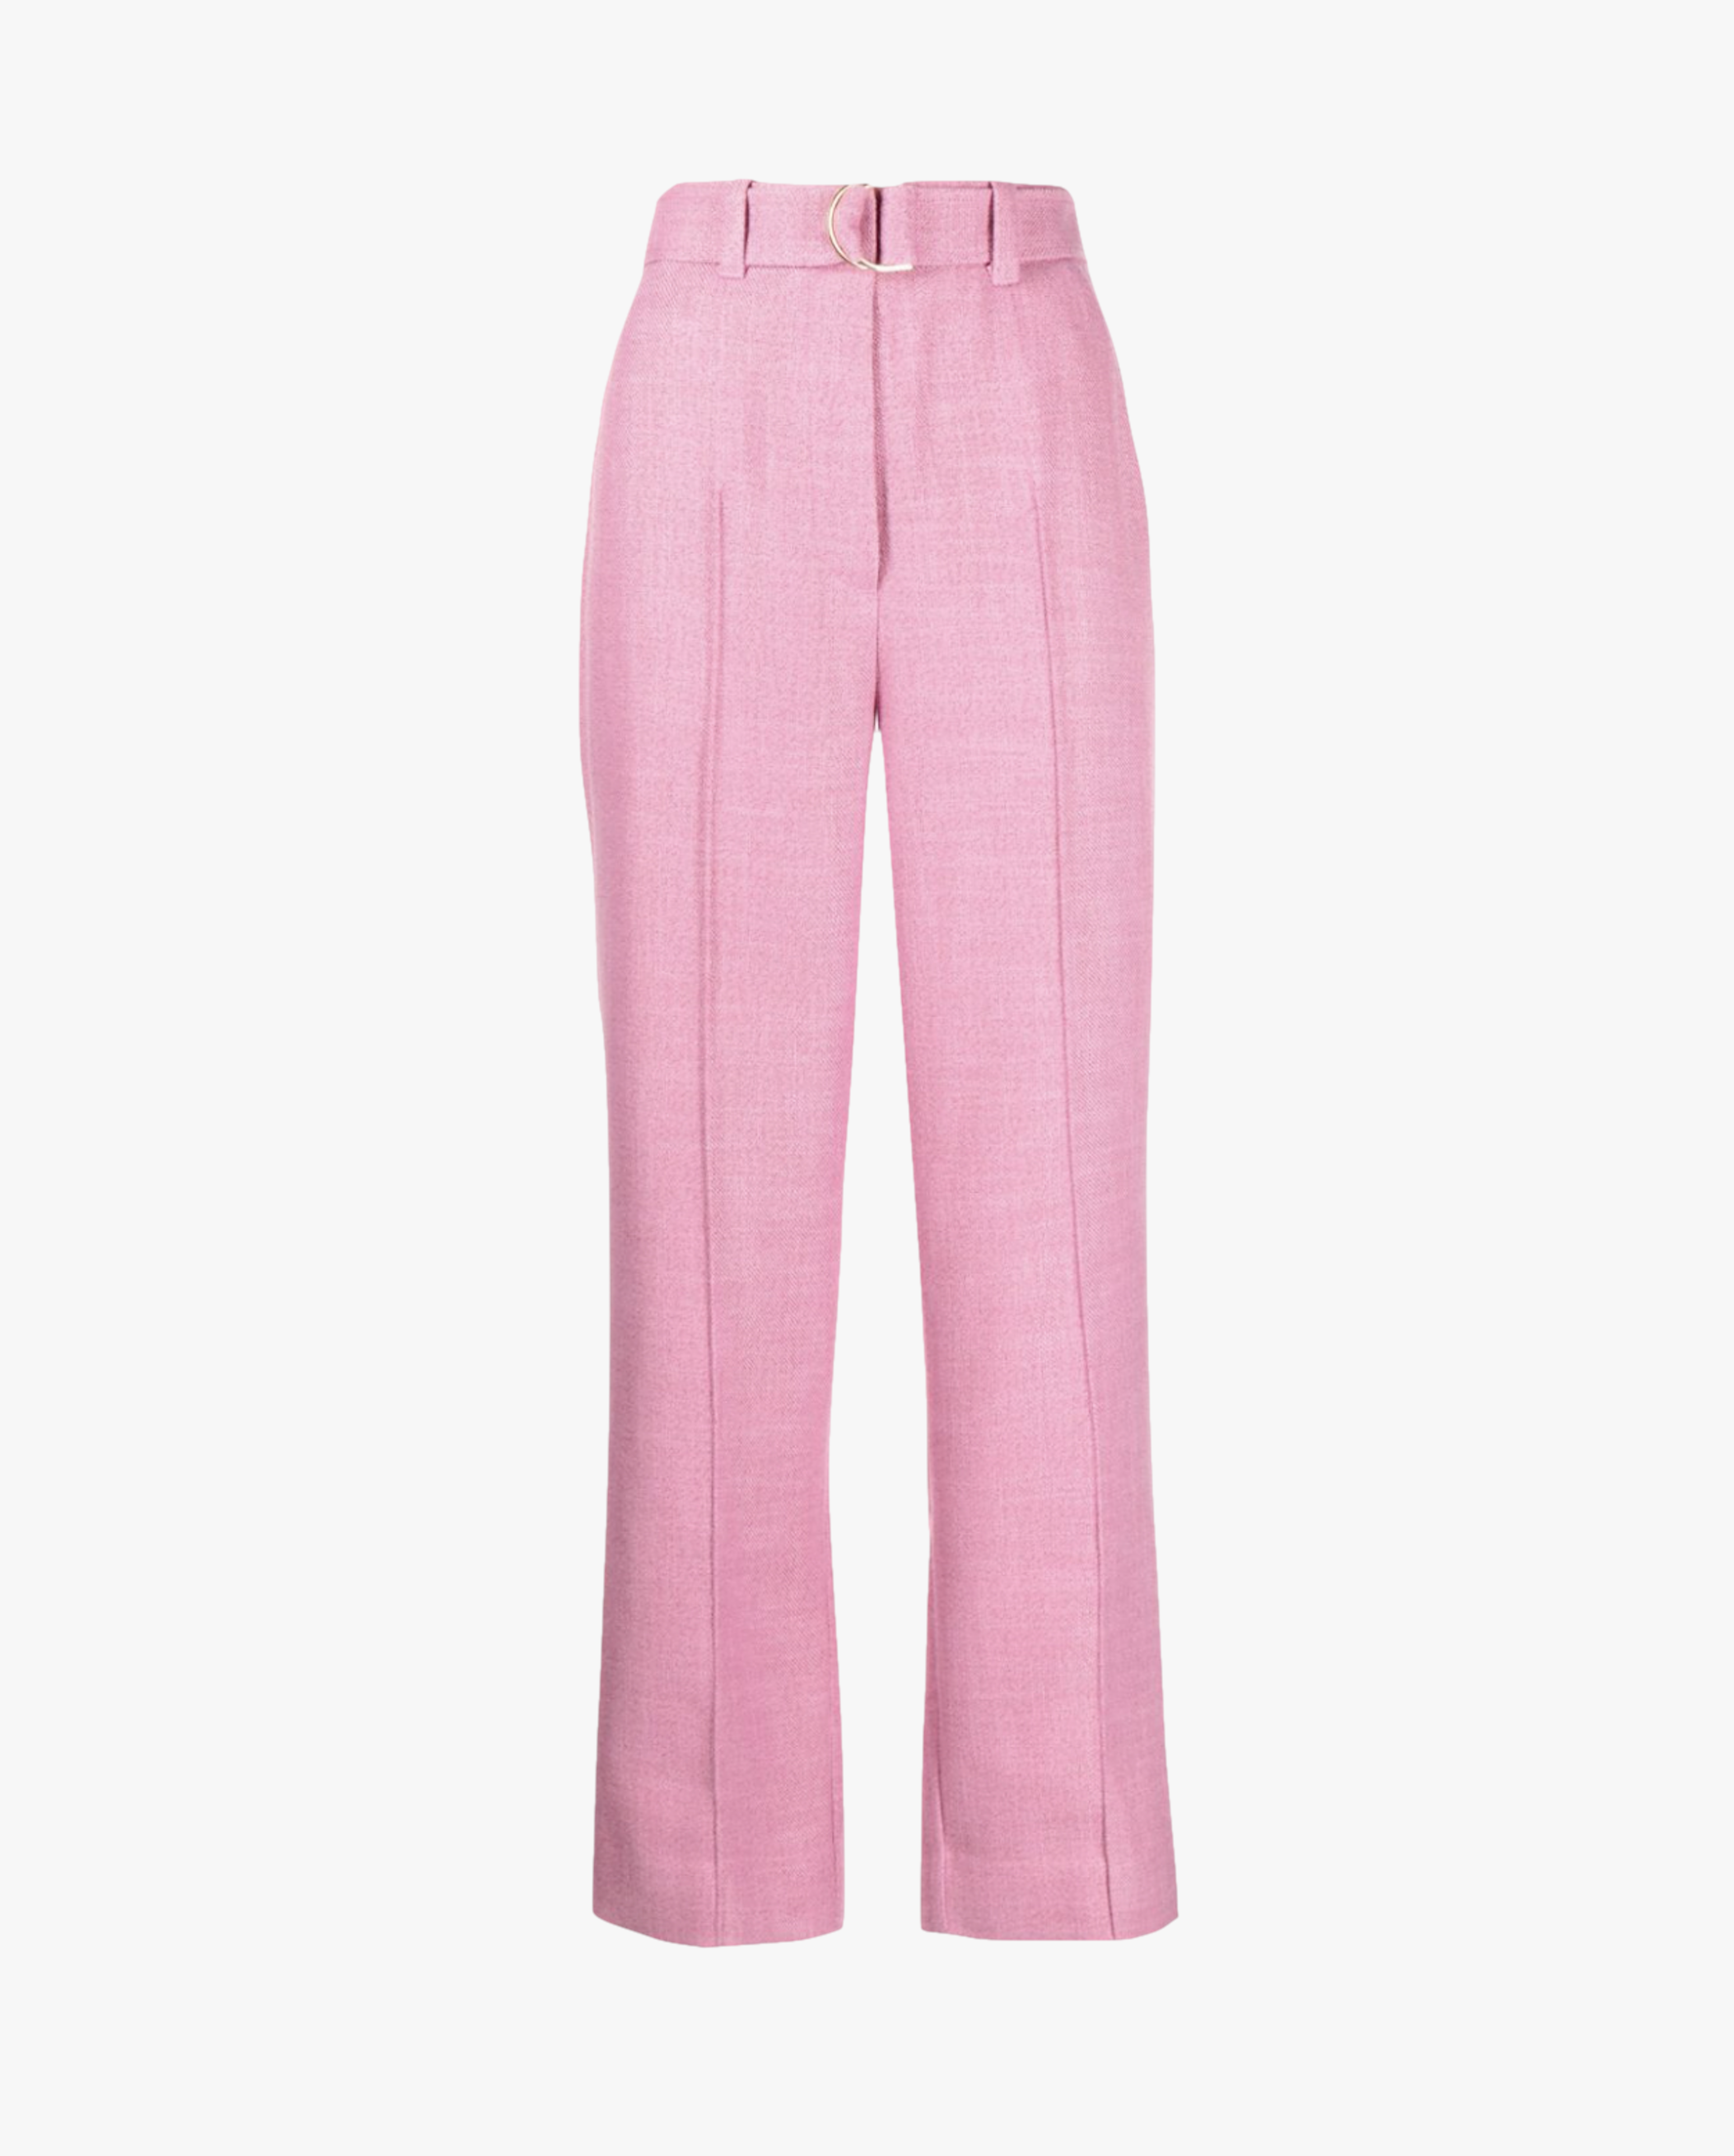 Shop Yerbury Pants from Acler at Seezona